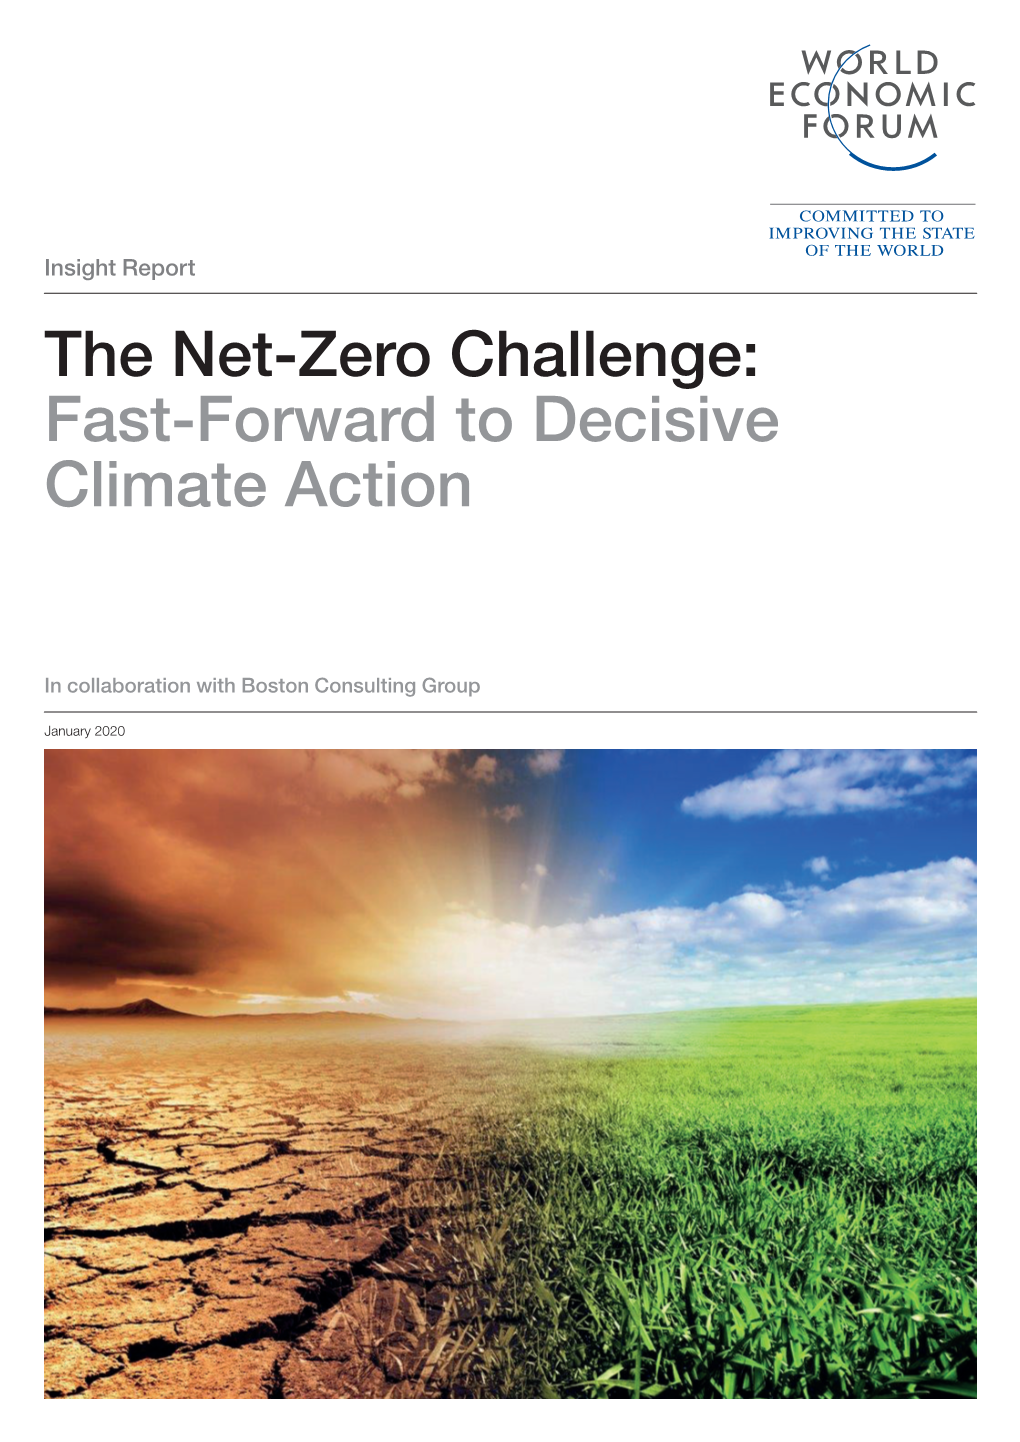 The Net-Zero Challenge: Fast-Forward to Decisive Climate Action